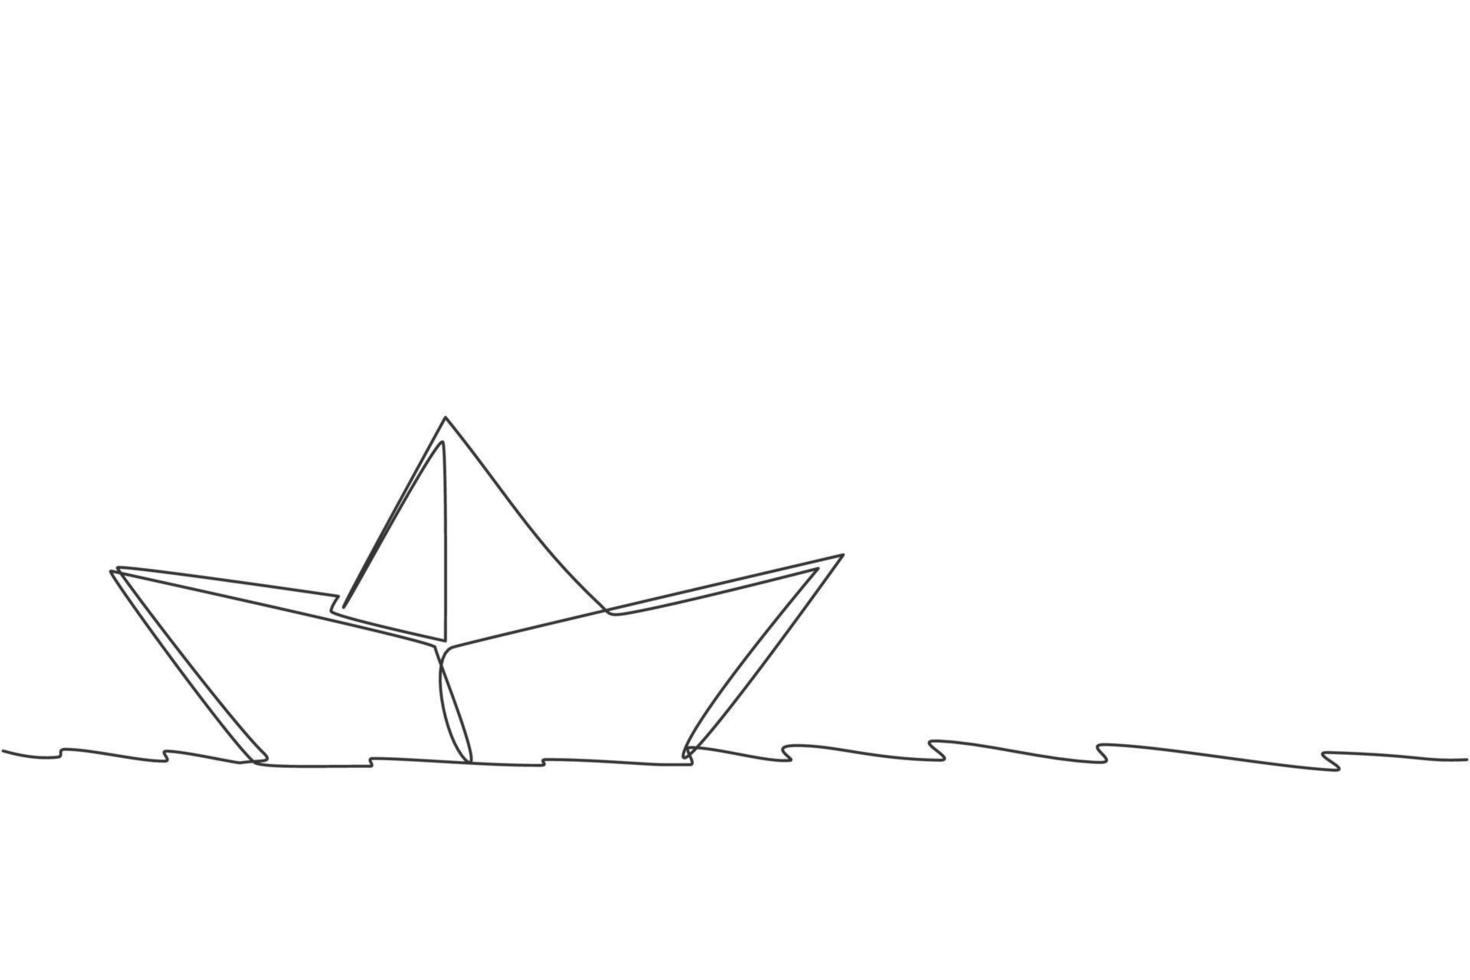 One continuous line drawing of paper boat sailing on the water river. Origami craft concept. Dynamic single line draw design vector graphic illustration